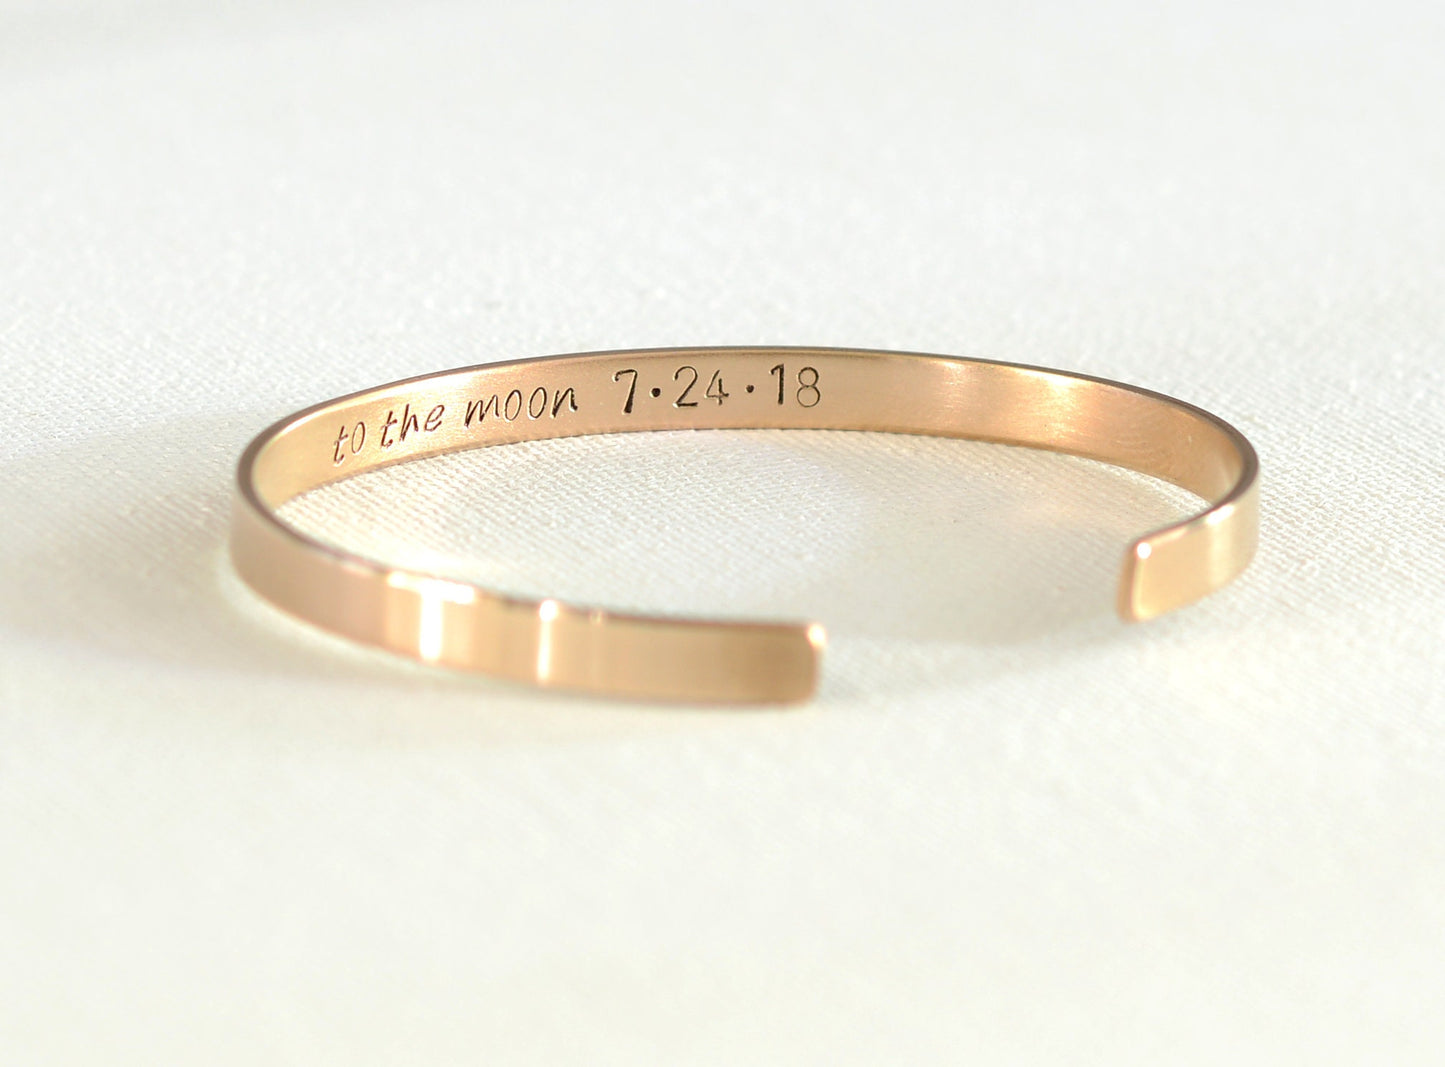 Love you to the moon and back stamped bronze bracelet